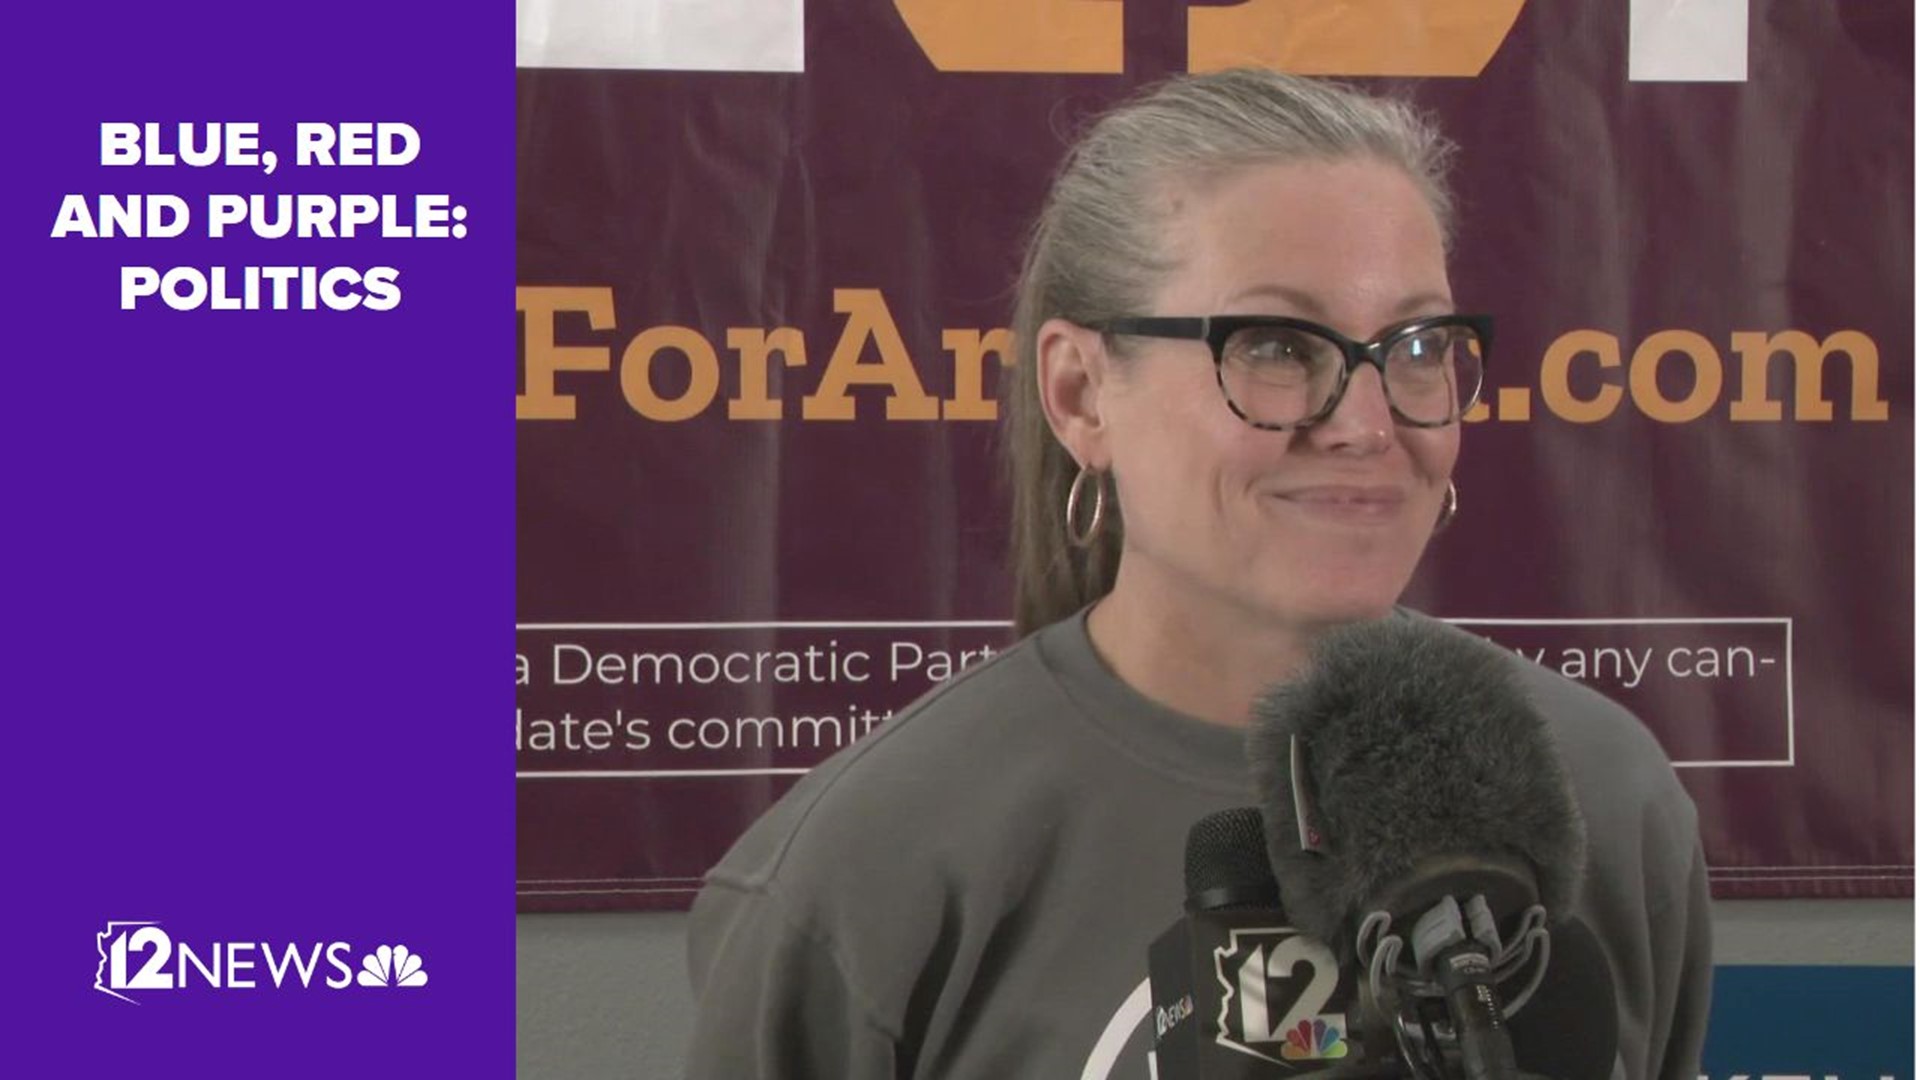 With less than 24 hours to go until Election Day in Arizona, Democratic candidate Katie Hobbs says it's possible to see a ballot recount